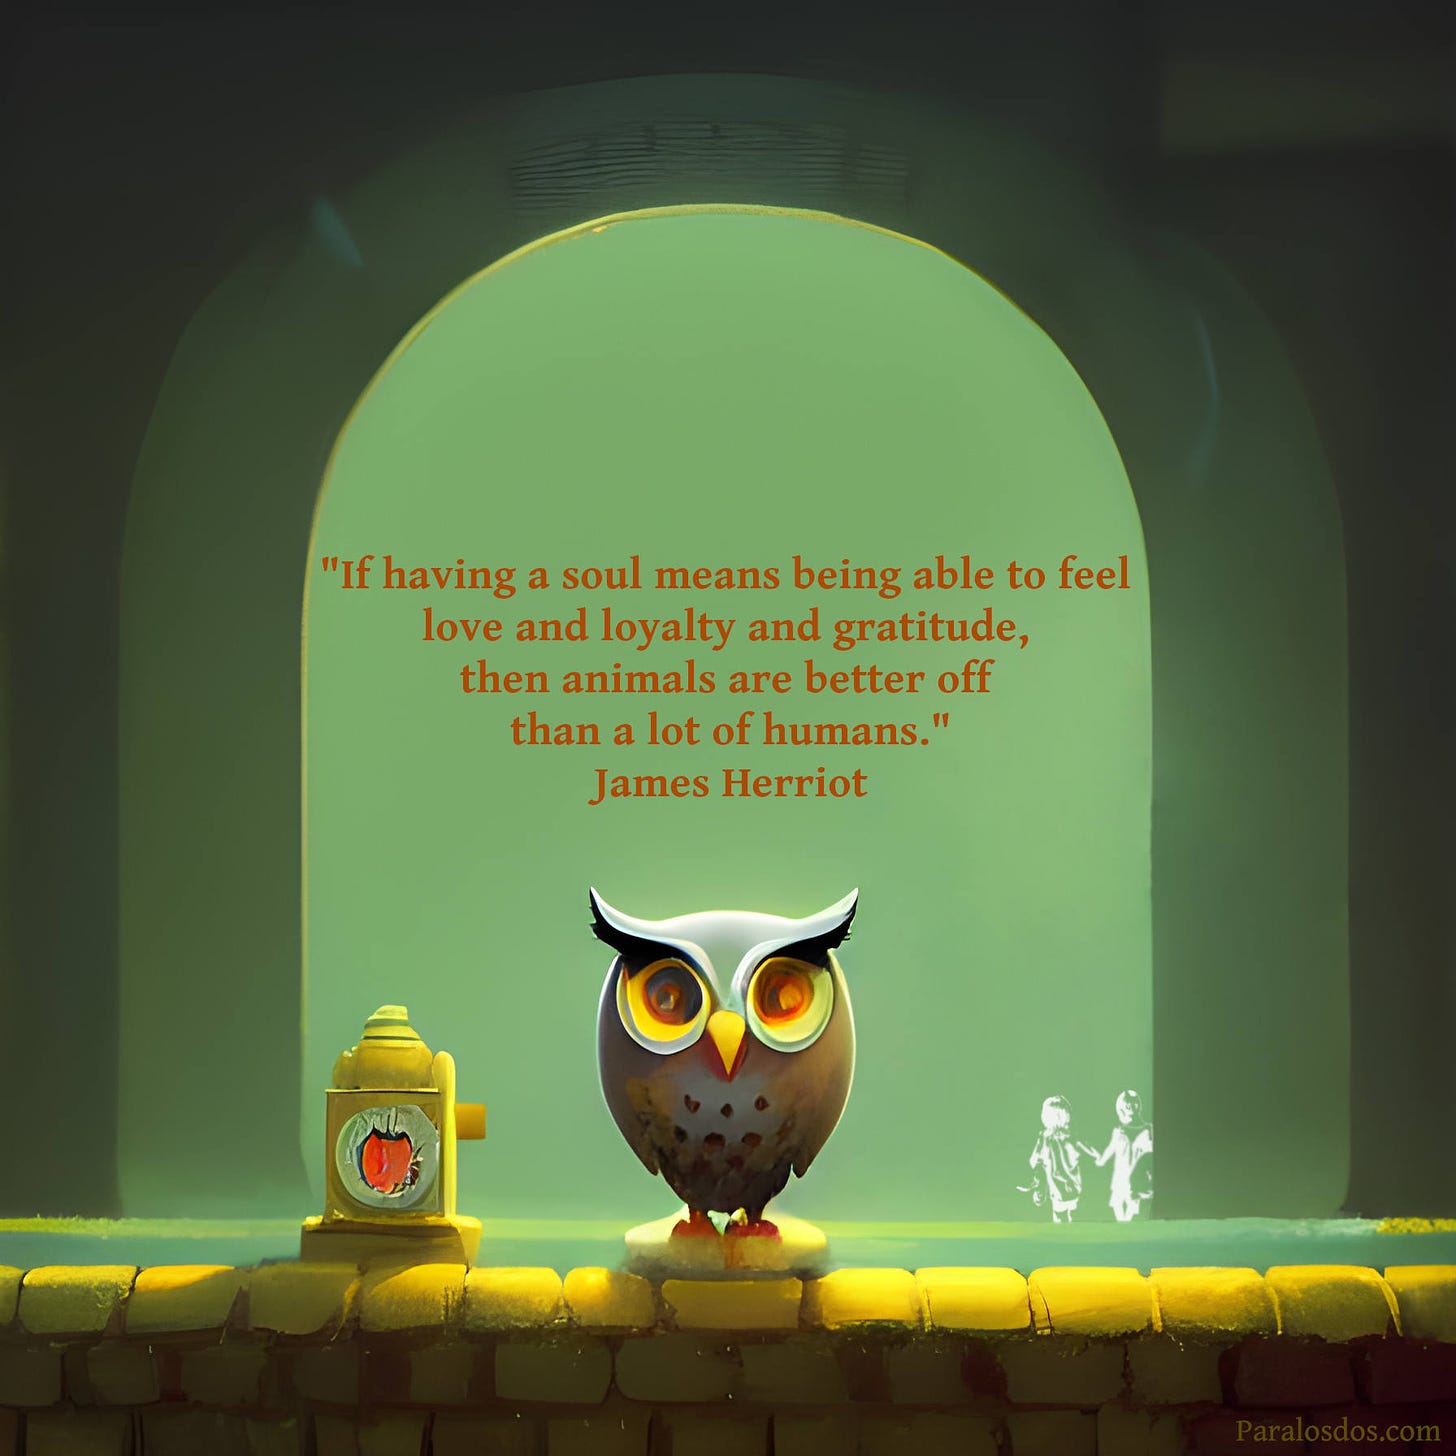 An artistic rendering of an owl sitting on a ledge.  The quote reads:  "If having a soul means being able to feel love and loyalty and gratitude, then animals are better off than a lot of humans." - James Herriot 